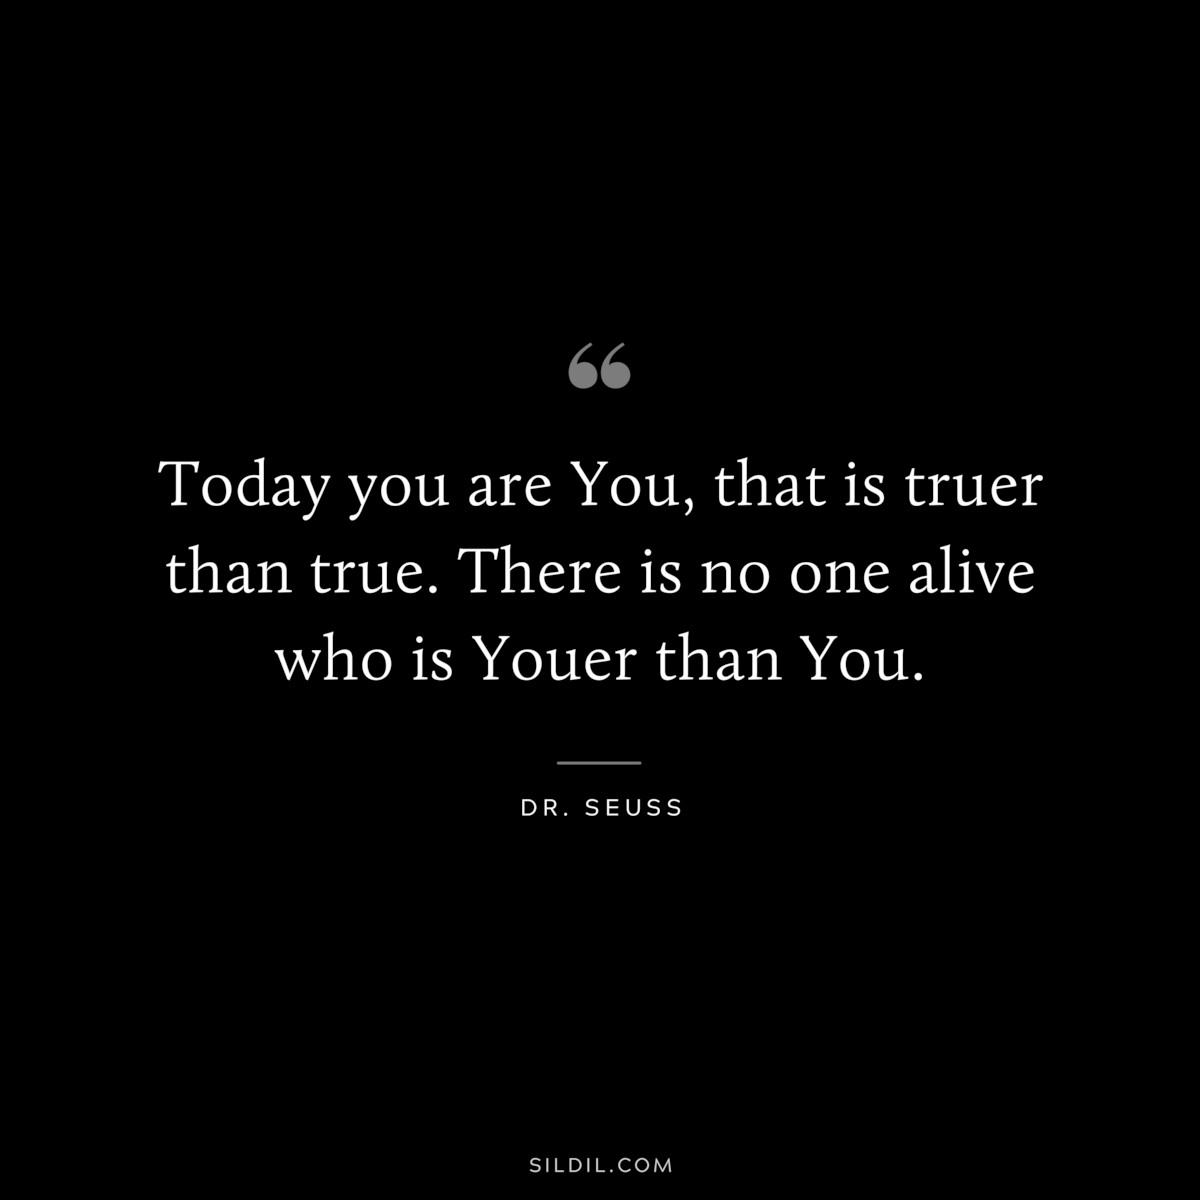 Today you are You, that is truer than true. There is no one alive who is Youer than You. ― Dr. Seuss